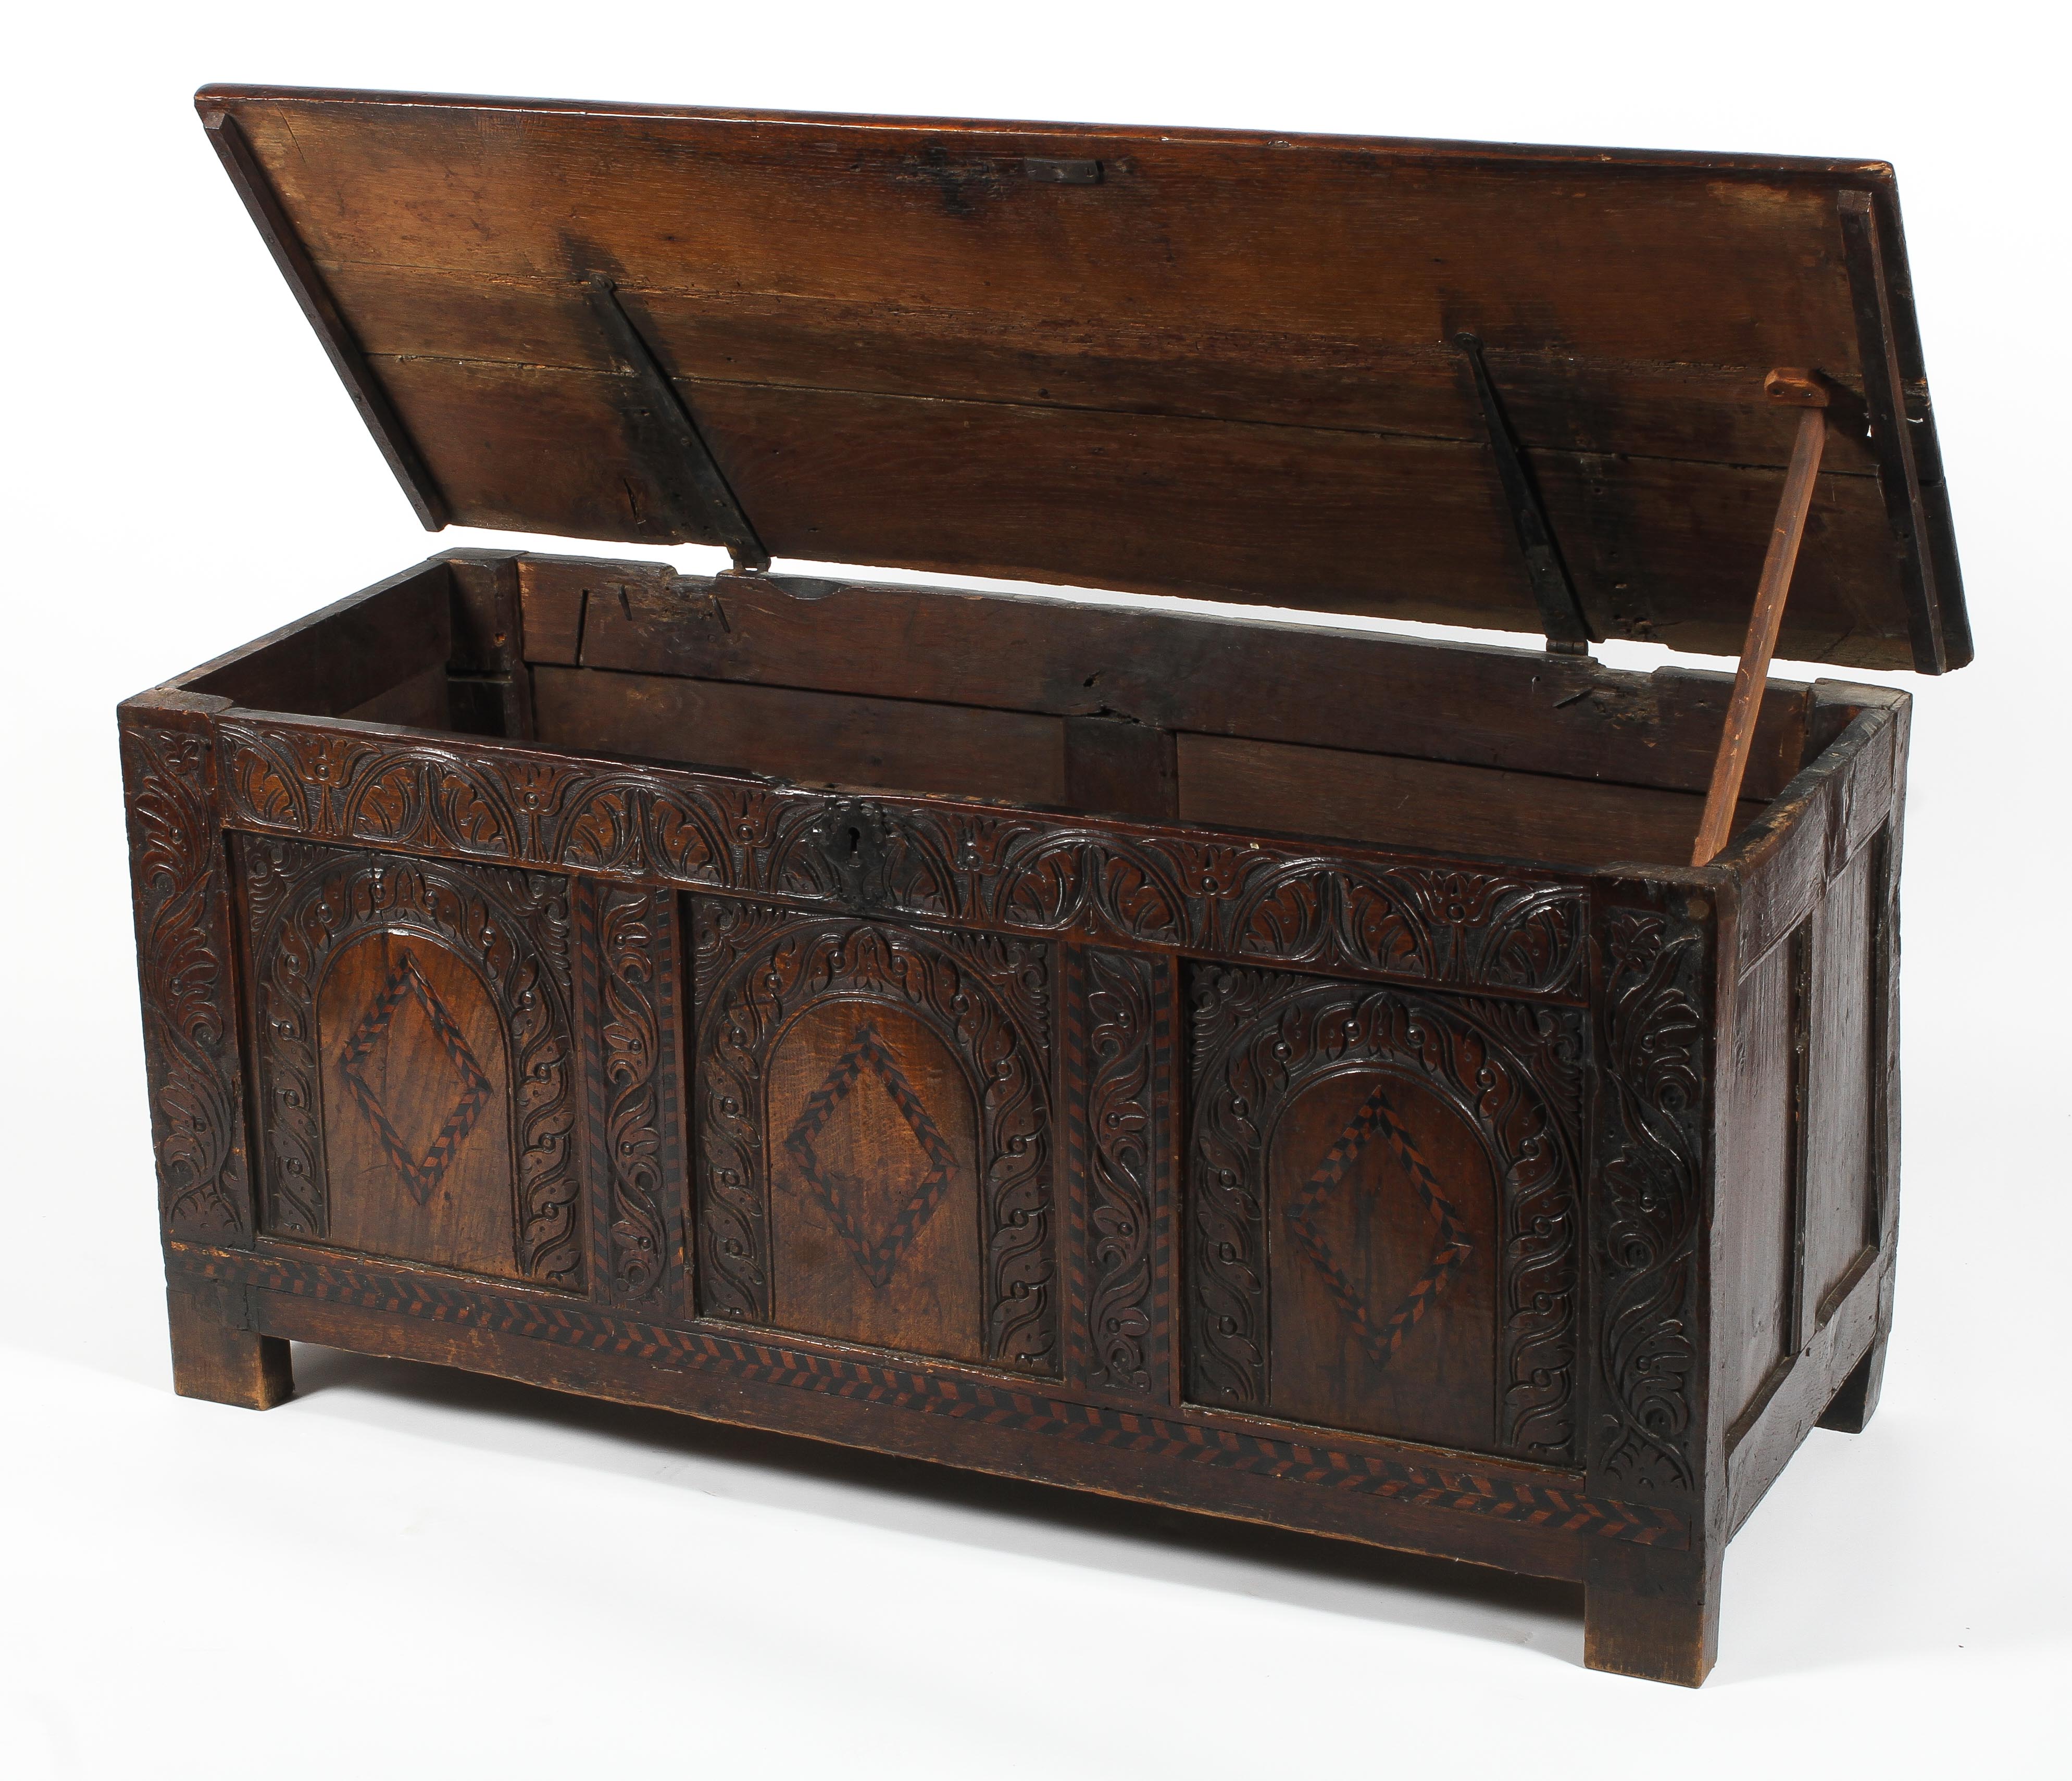 An 18th century oak and marquetry inlaid coffer, - Image 2 of 2